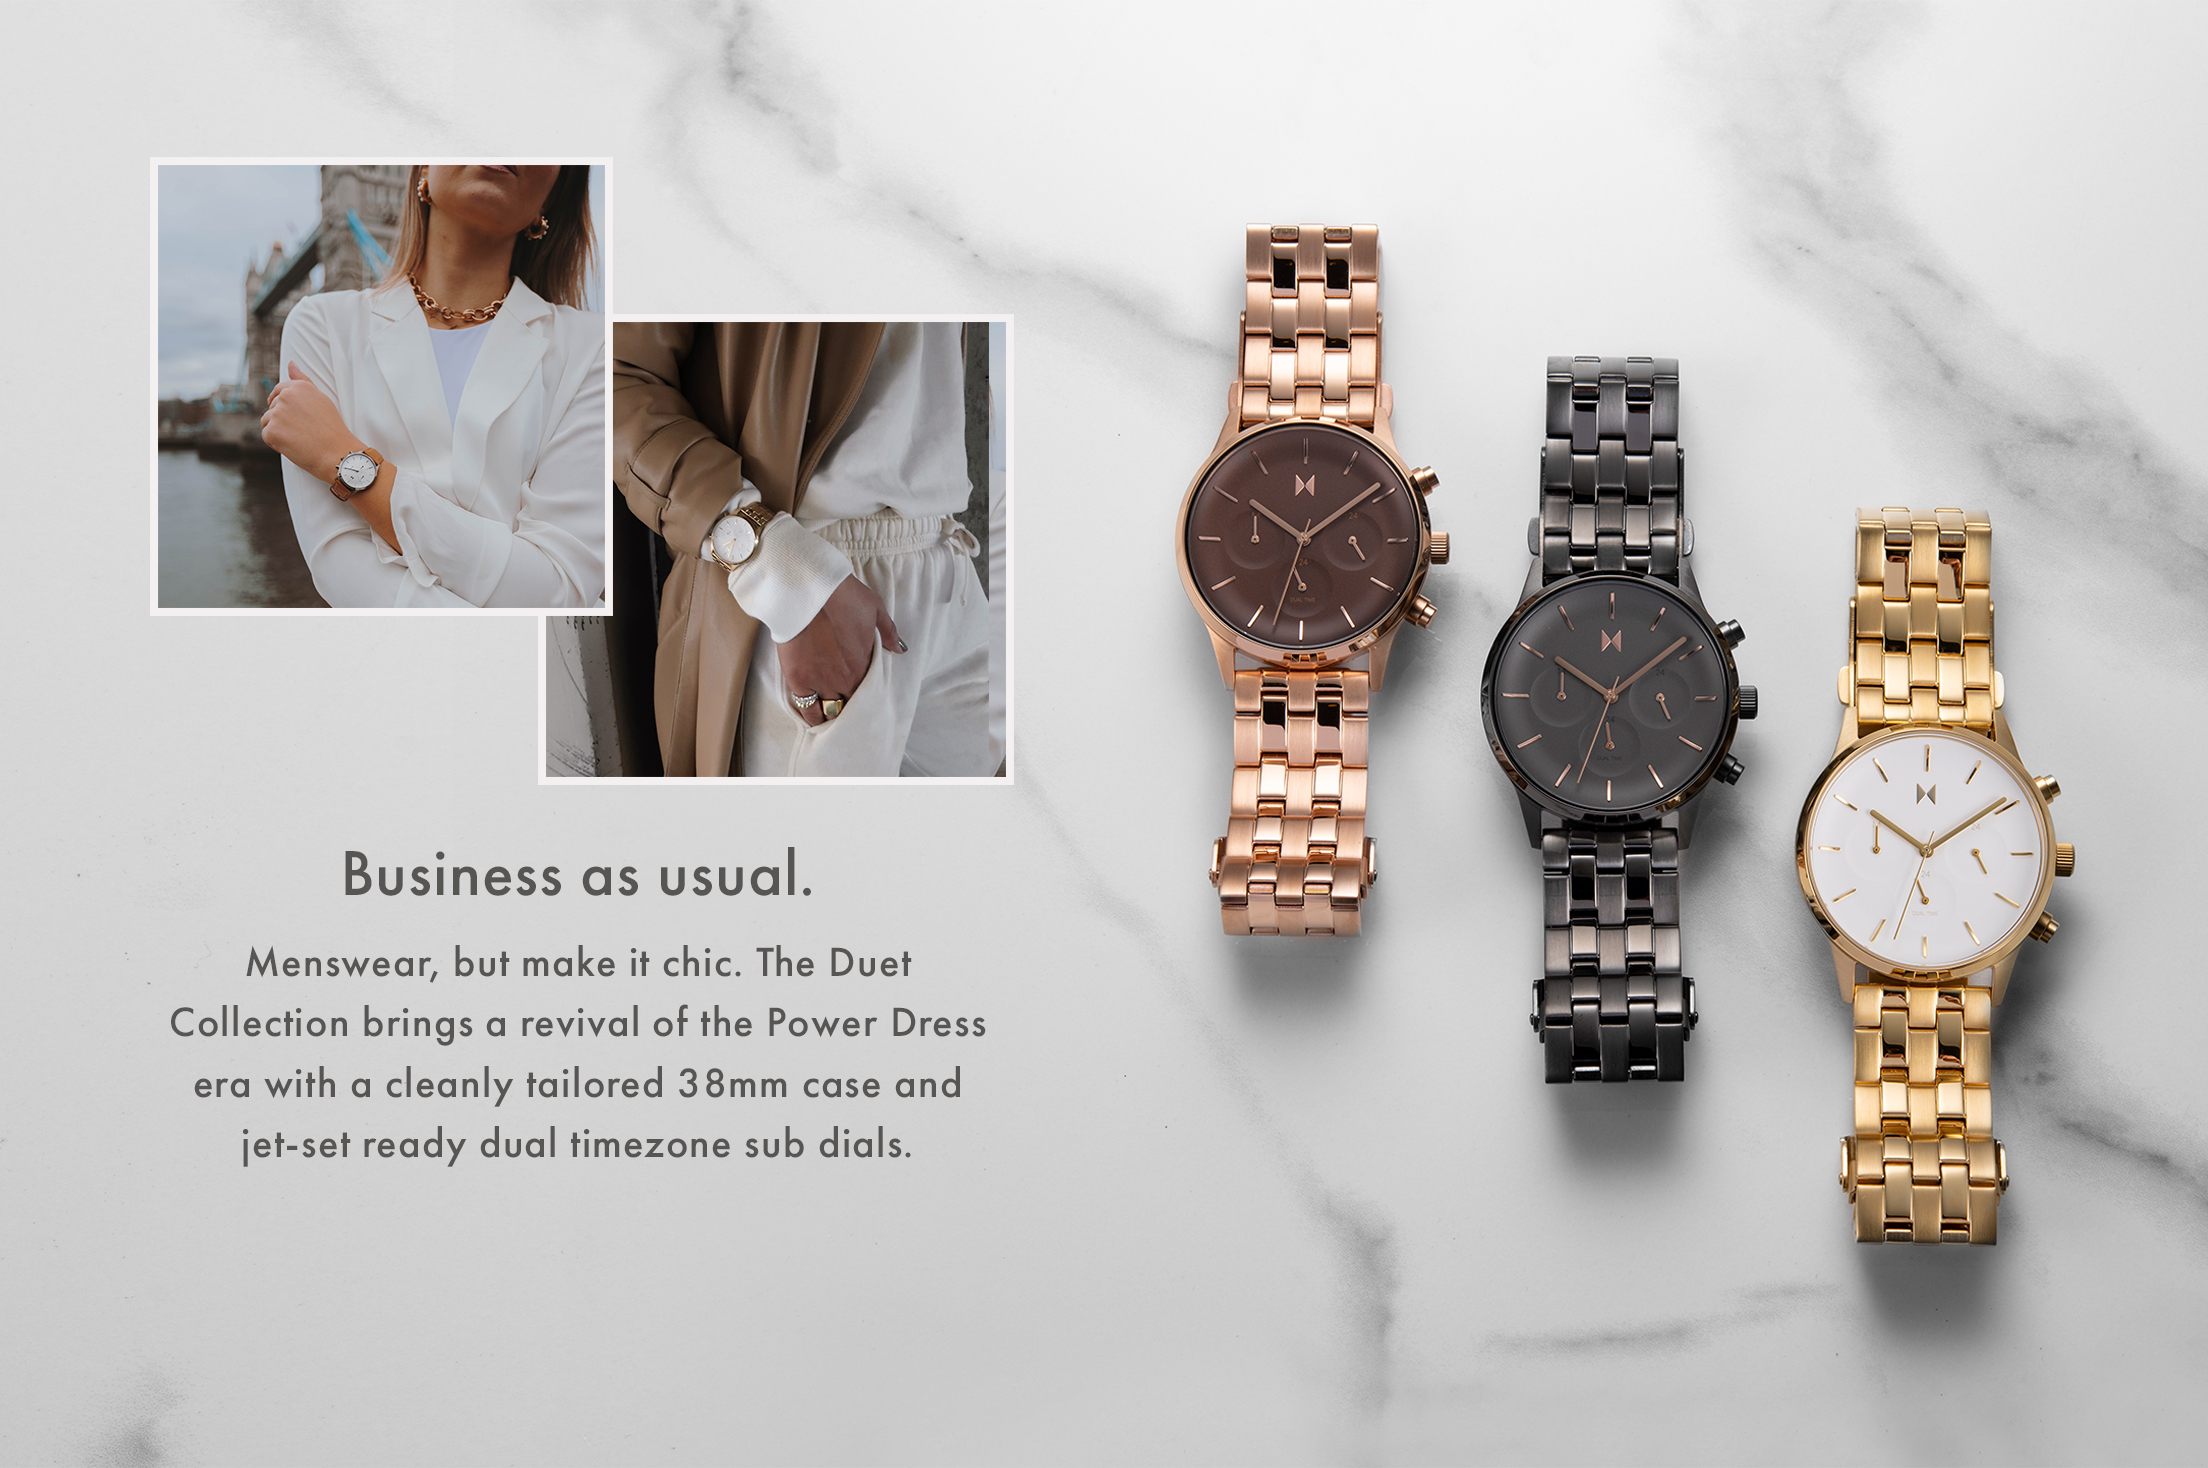 Business as usual. Menswear, but make it chic. The Duet Collection brings a revival of the Power Dress era with a cleanly tailored 38mm case and jet-set ready dual timezone sub dials.